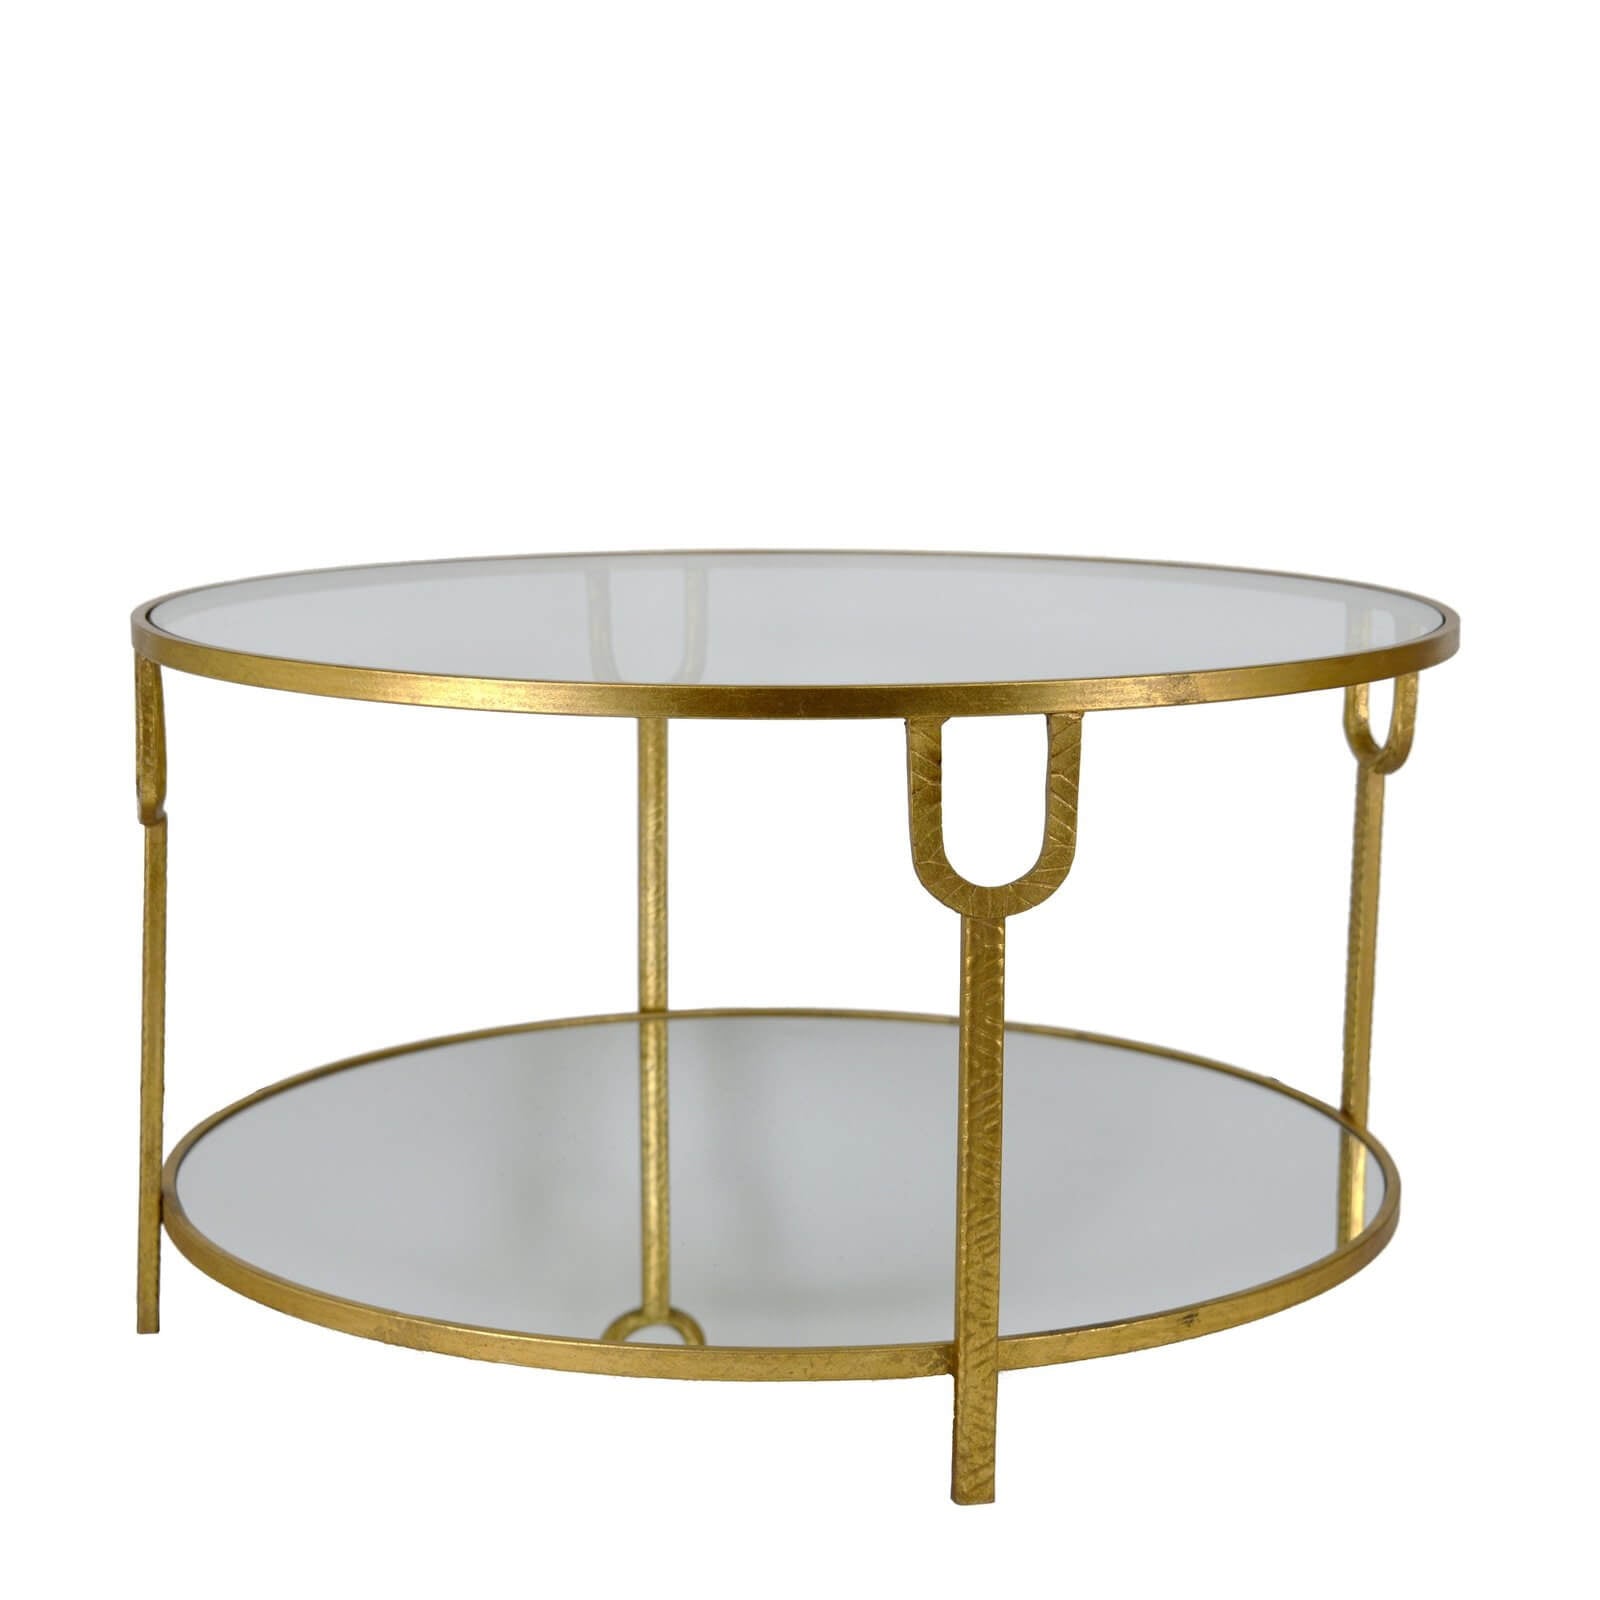 Khloe Gold Leaf 2 Shelves Round Coffee Table - Lillian Home 